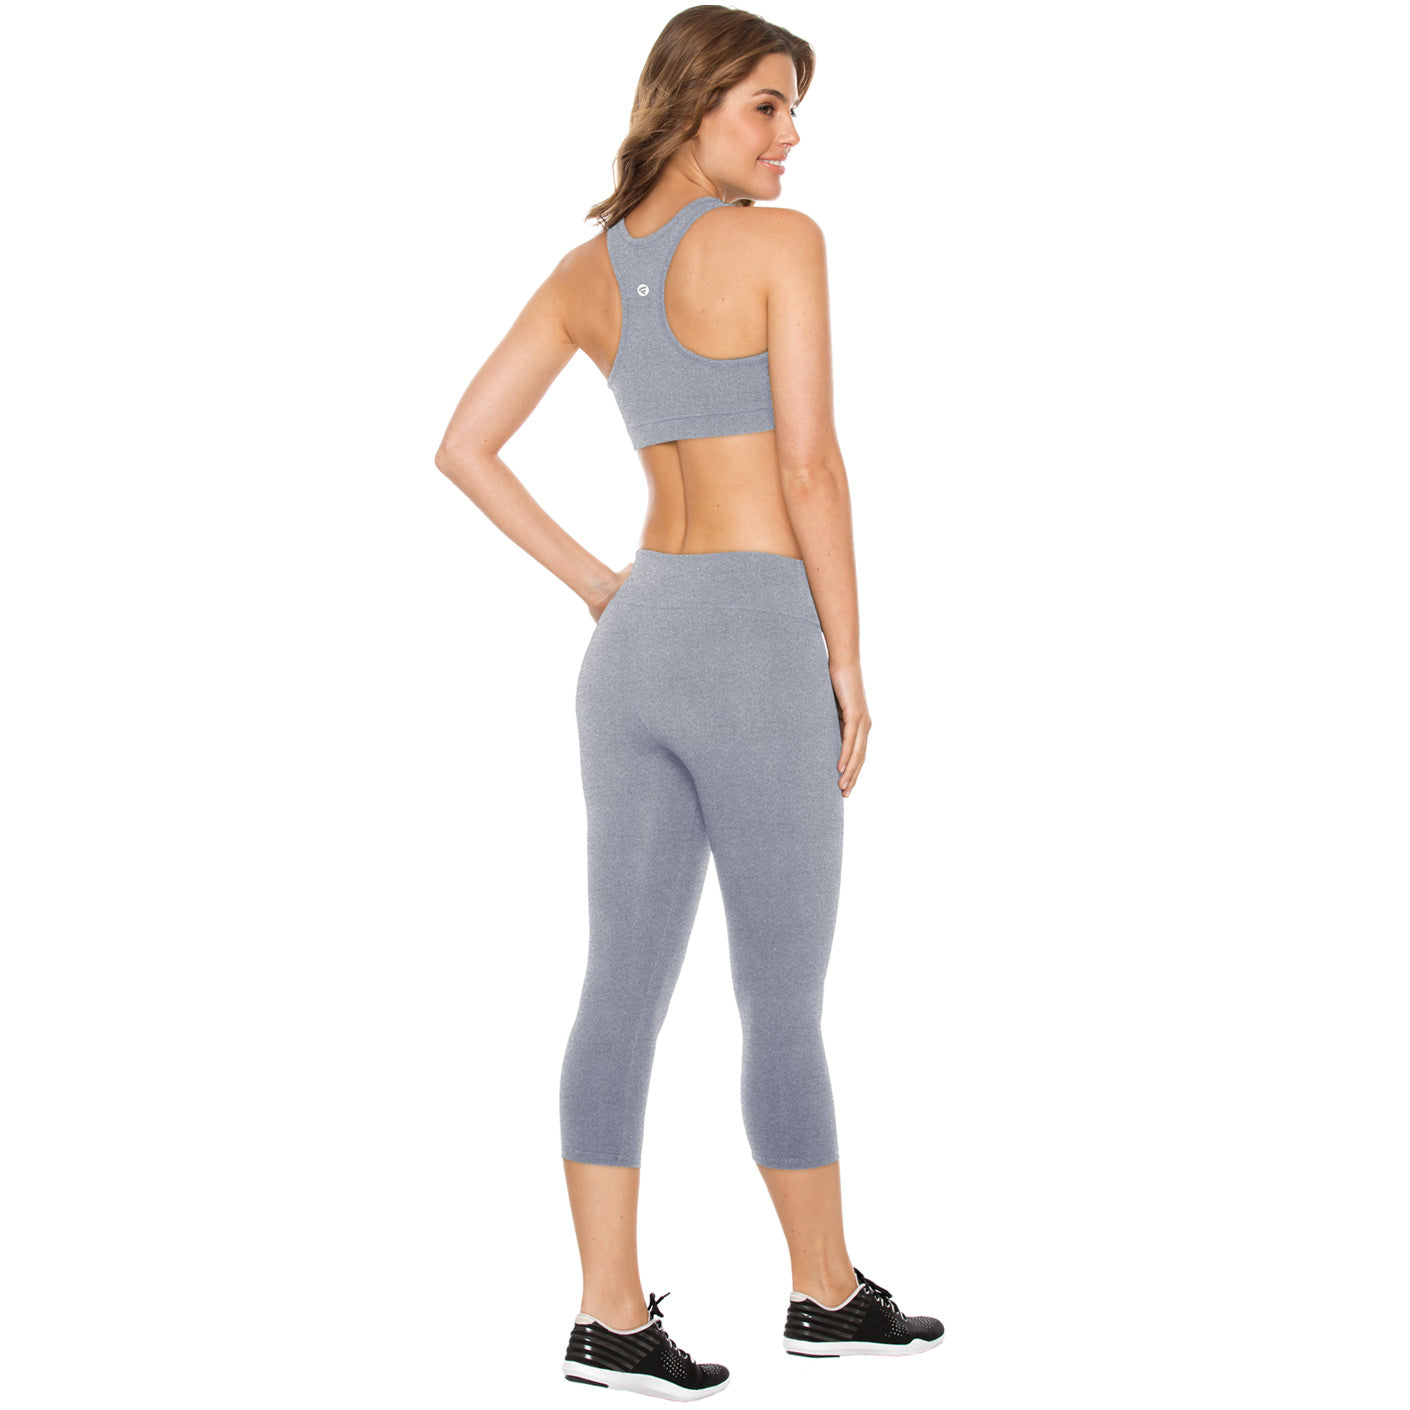 Women's Champion Absolute SmoothTec Capri Workout Tights